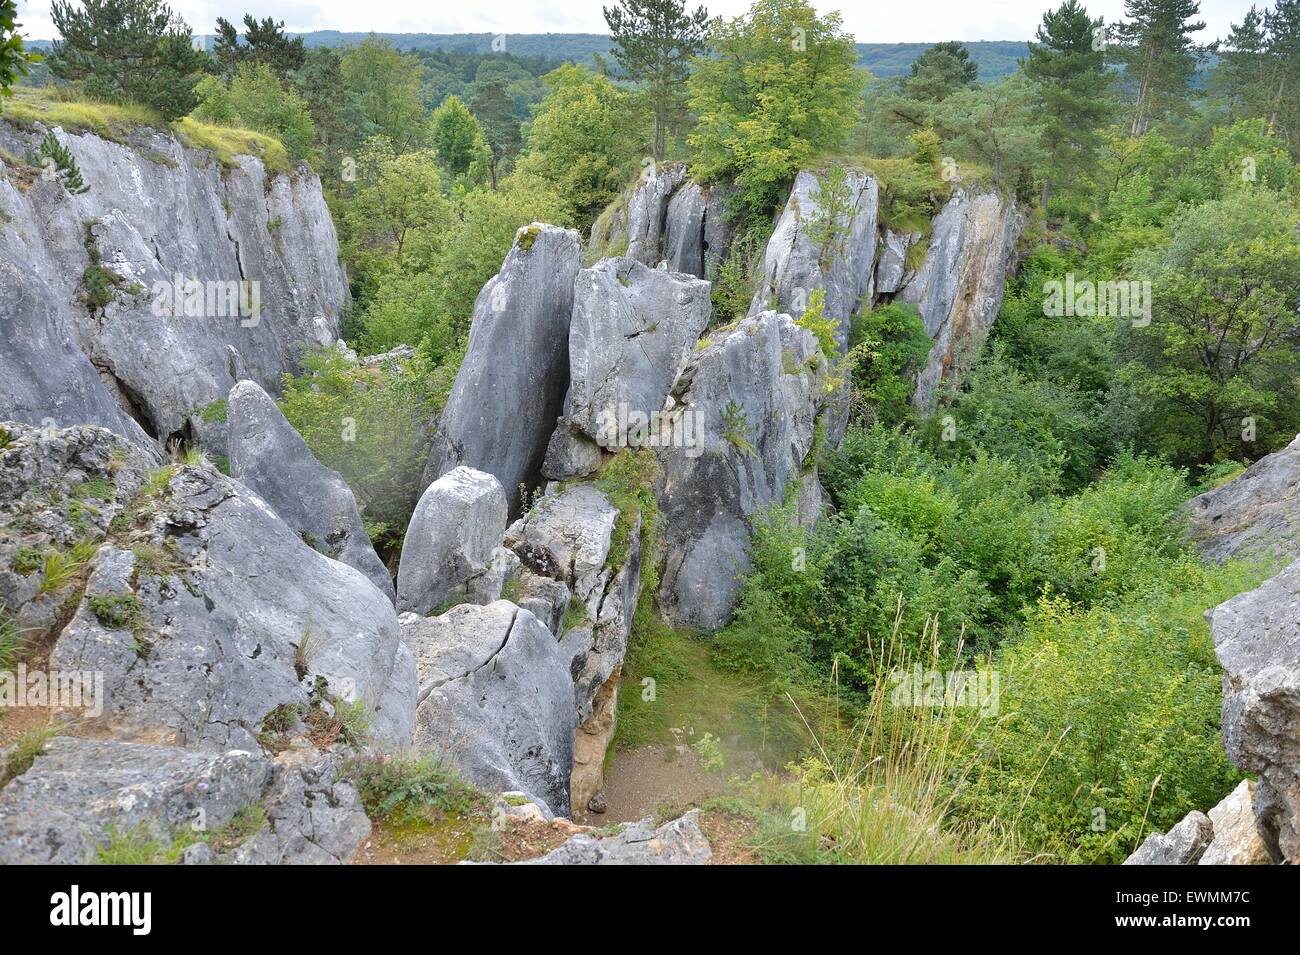 The Fondry des chiens (Pits of the dogs) strange geologic site with close connections to karst development Belgium Stock Photo